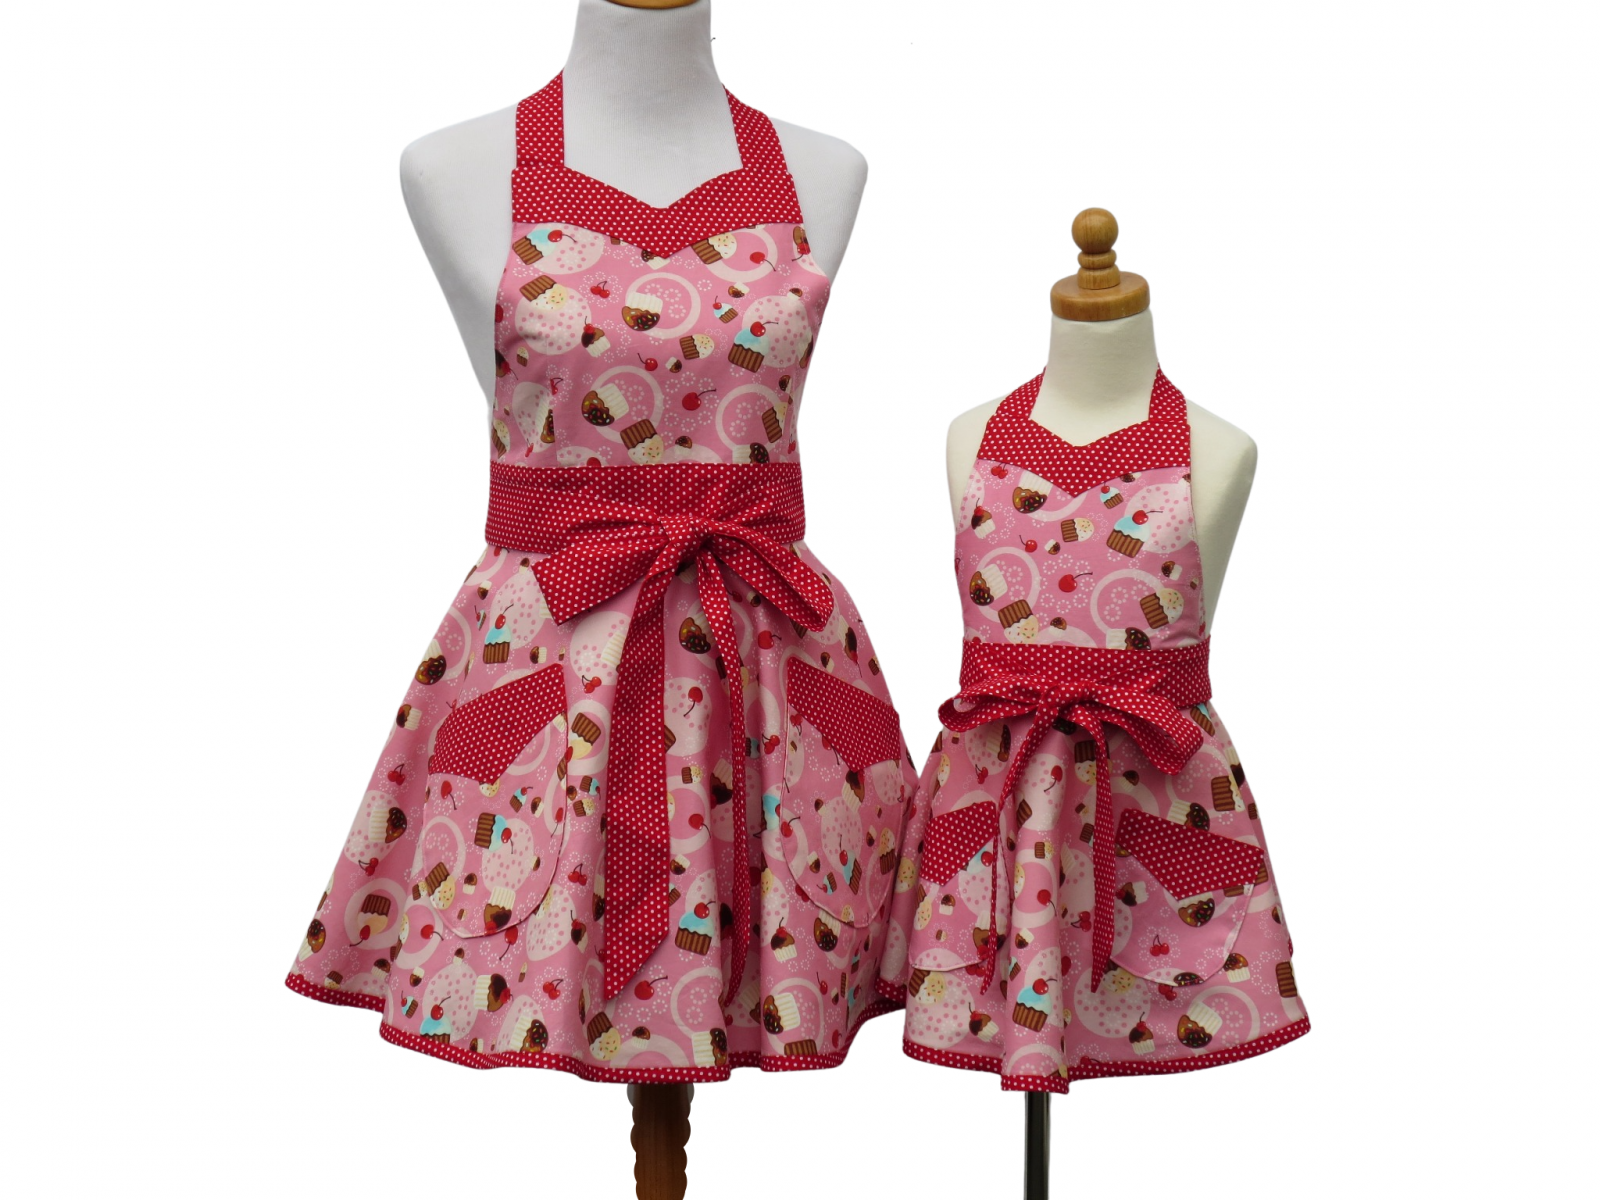 https://www.stitchedbybeverly.com/sites/stitchedbybeverly.indiemade.com/files/imagecache/im_clientsite_product_zoom/mother_daughter_pink_cupcake_aprons.jpg